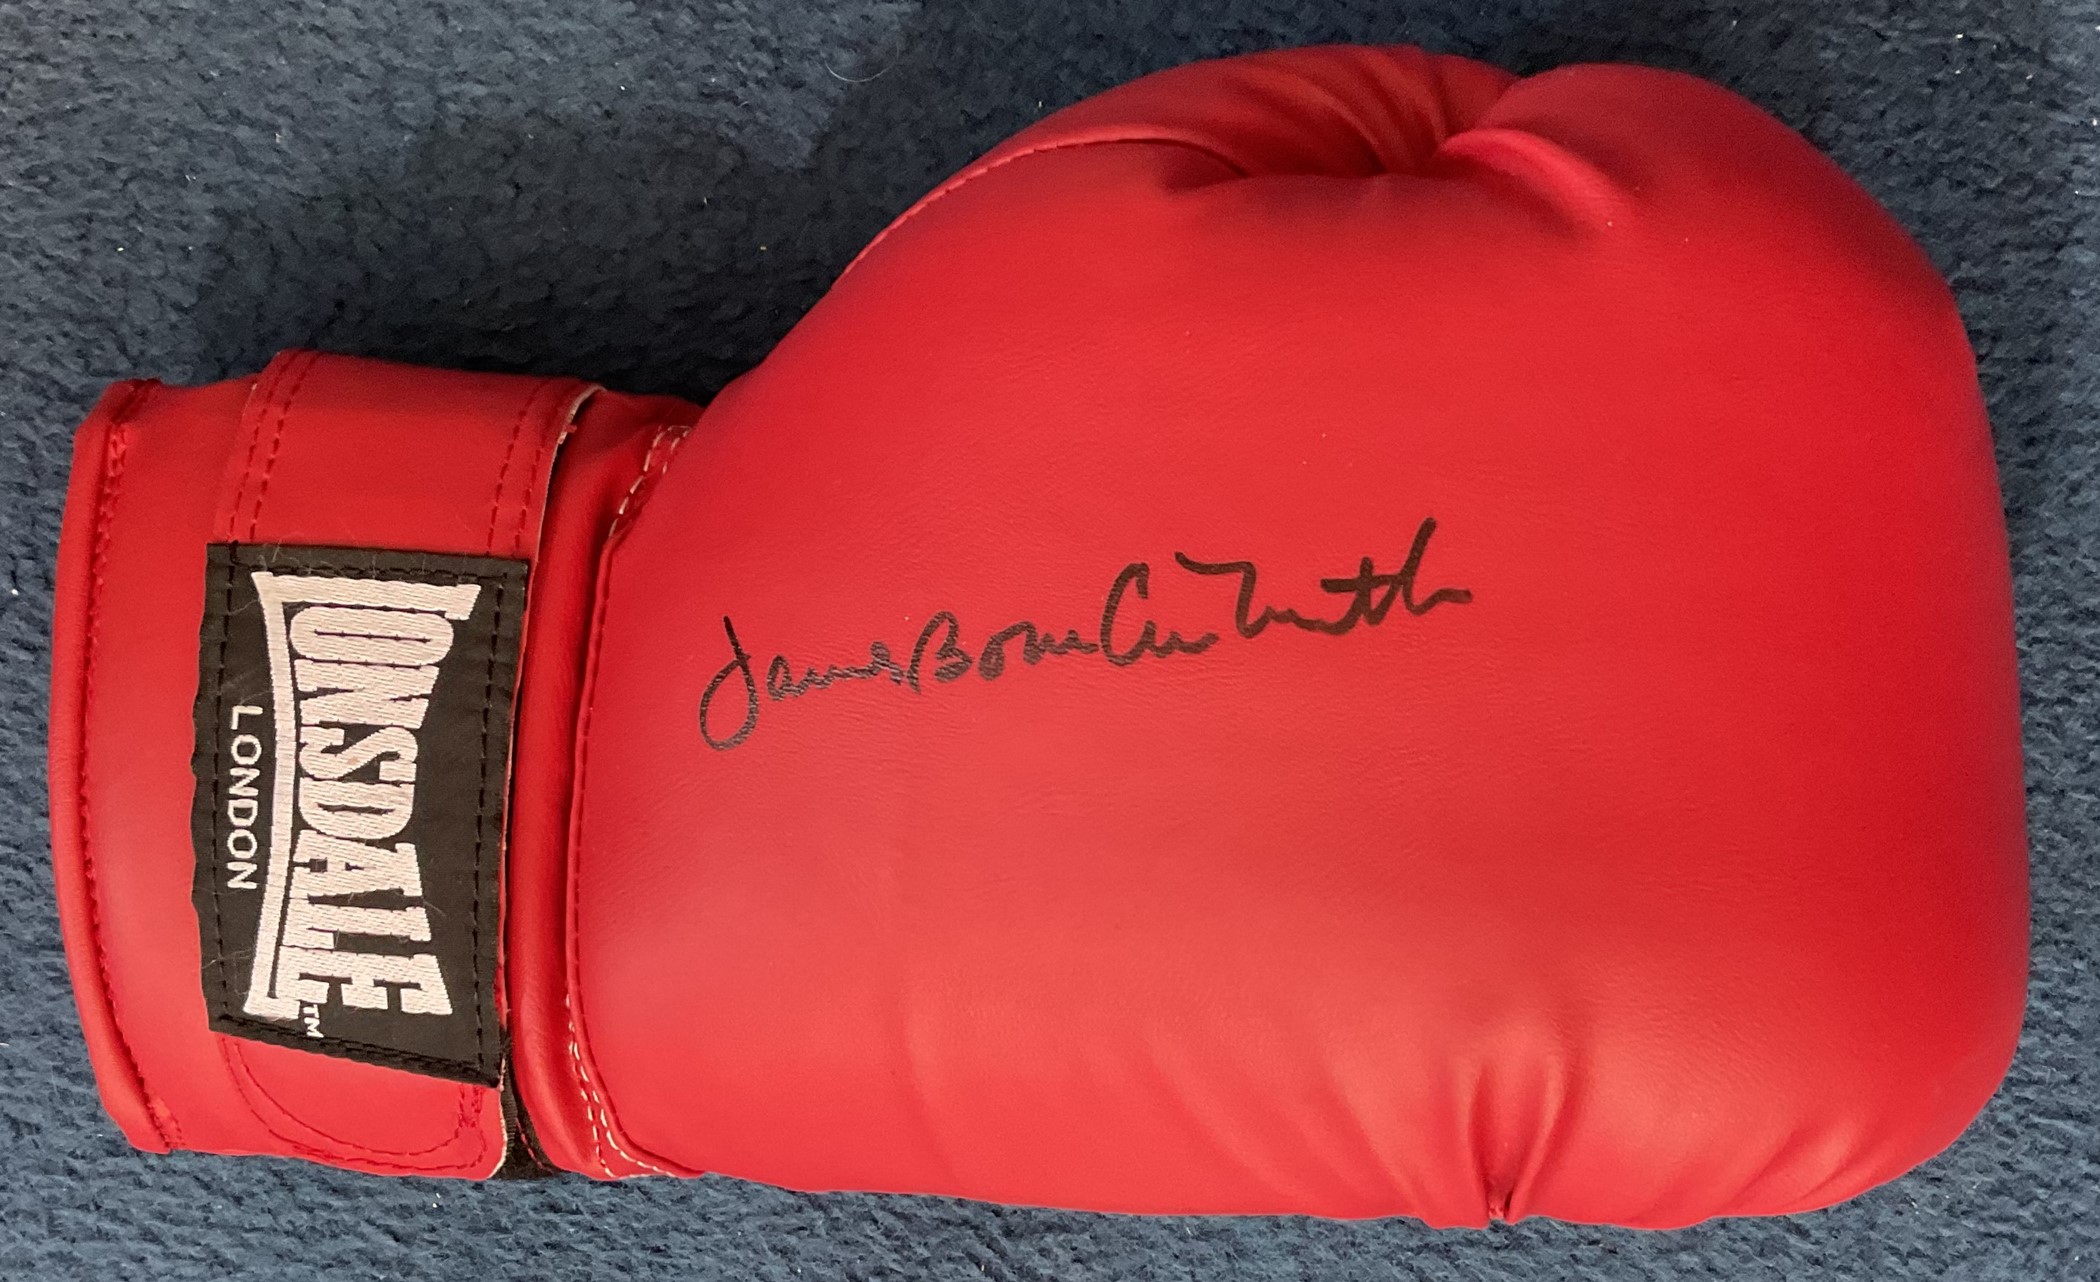 James Bonecrusher Smith Signed Red Lonsdale Boxing Glove. Signed in black ink. Good condition. All